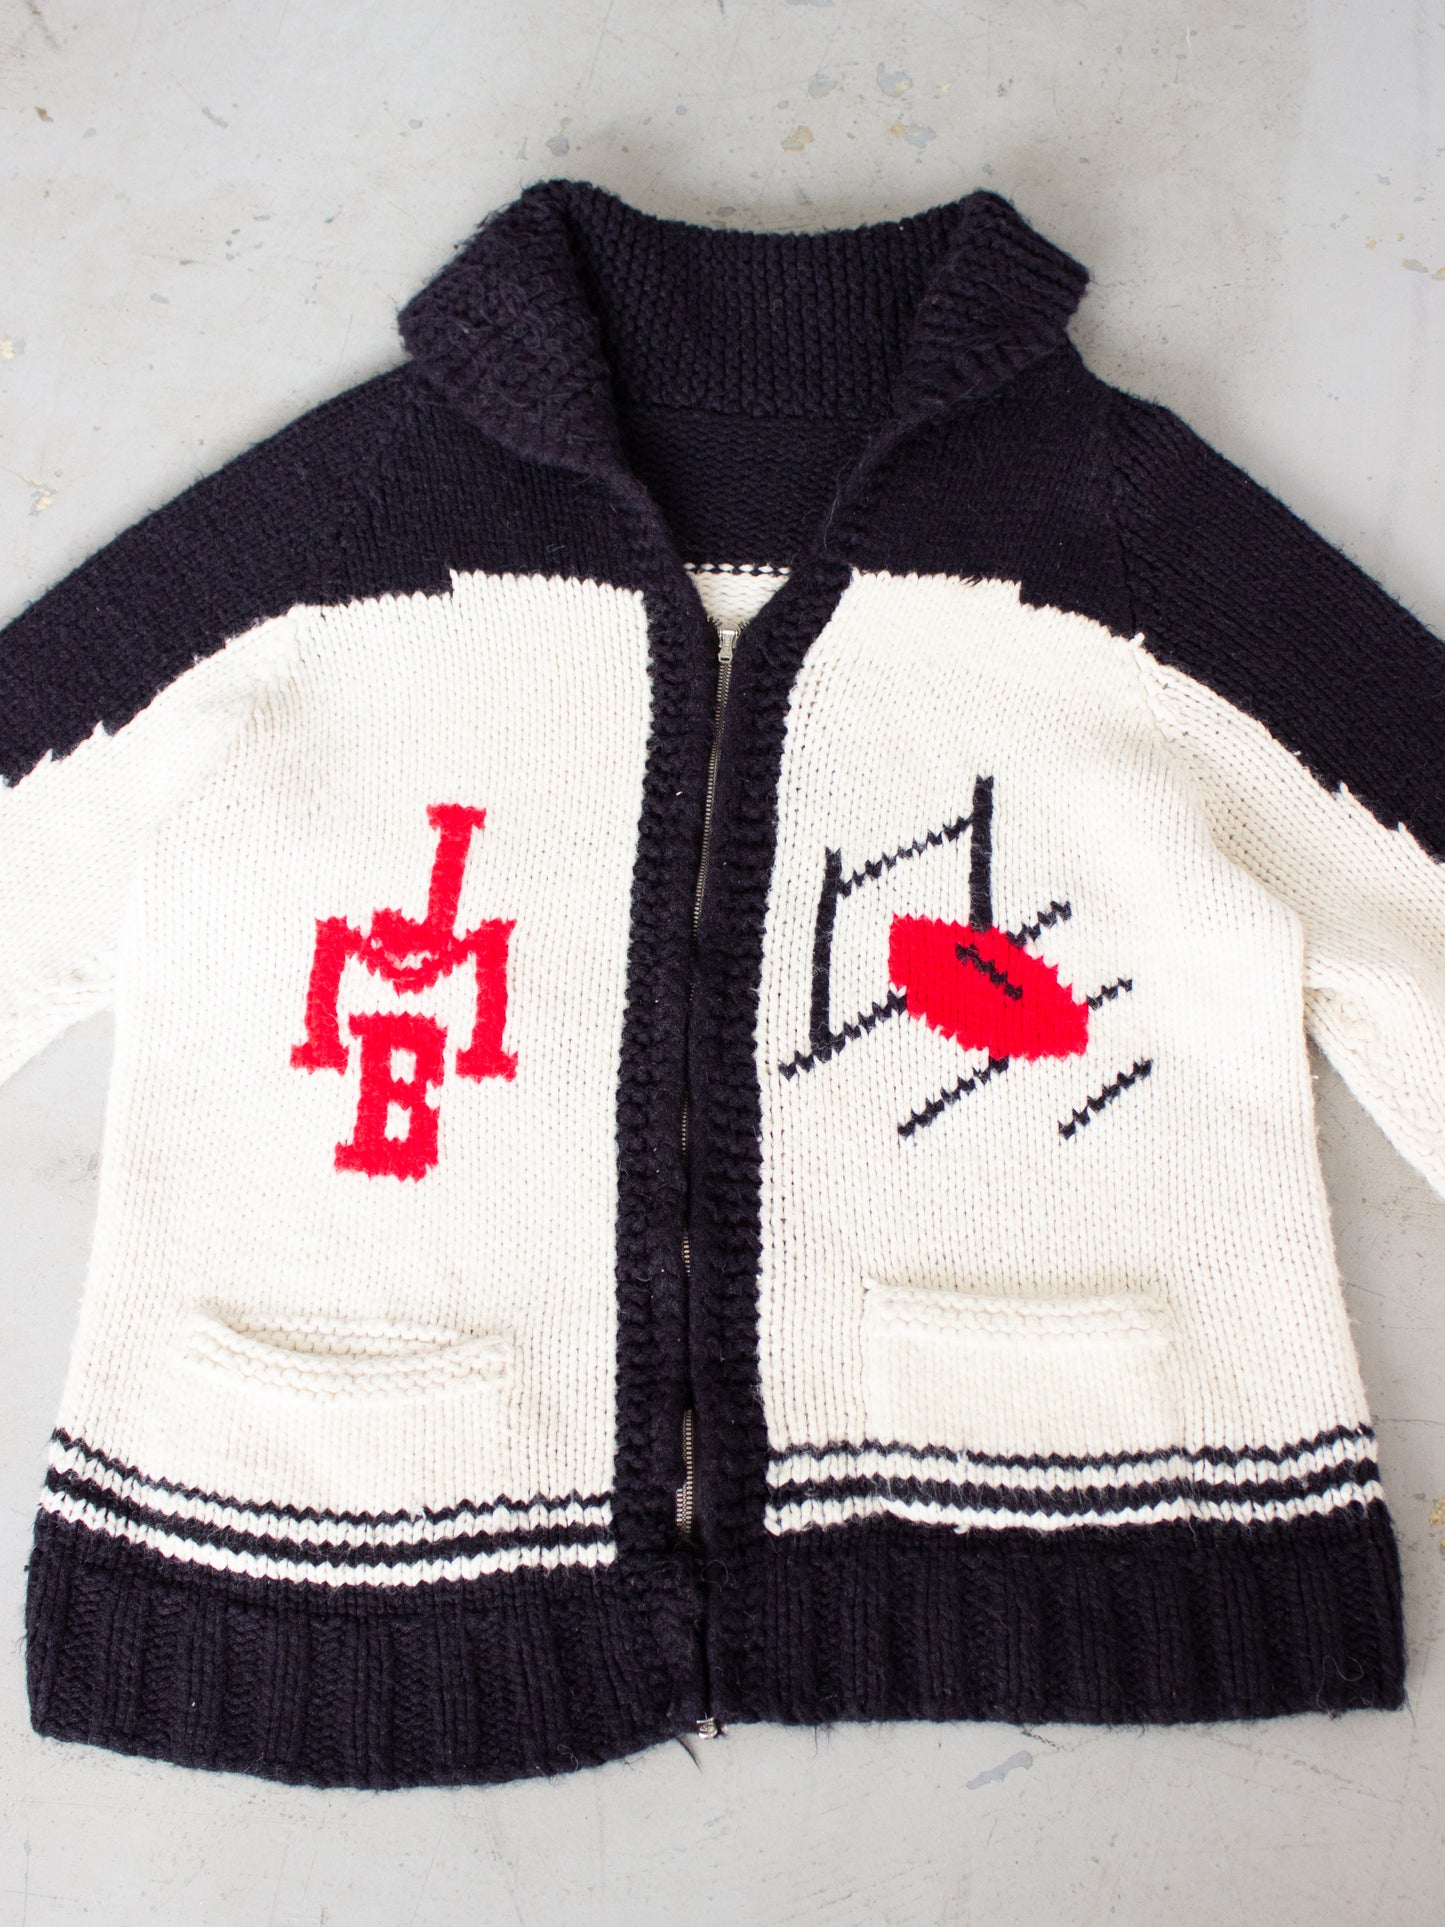 1940's - 1950's Cowichan Style JMB Football Thick Knit Wool Sweater with Crown Zipper Small Medium